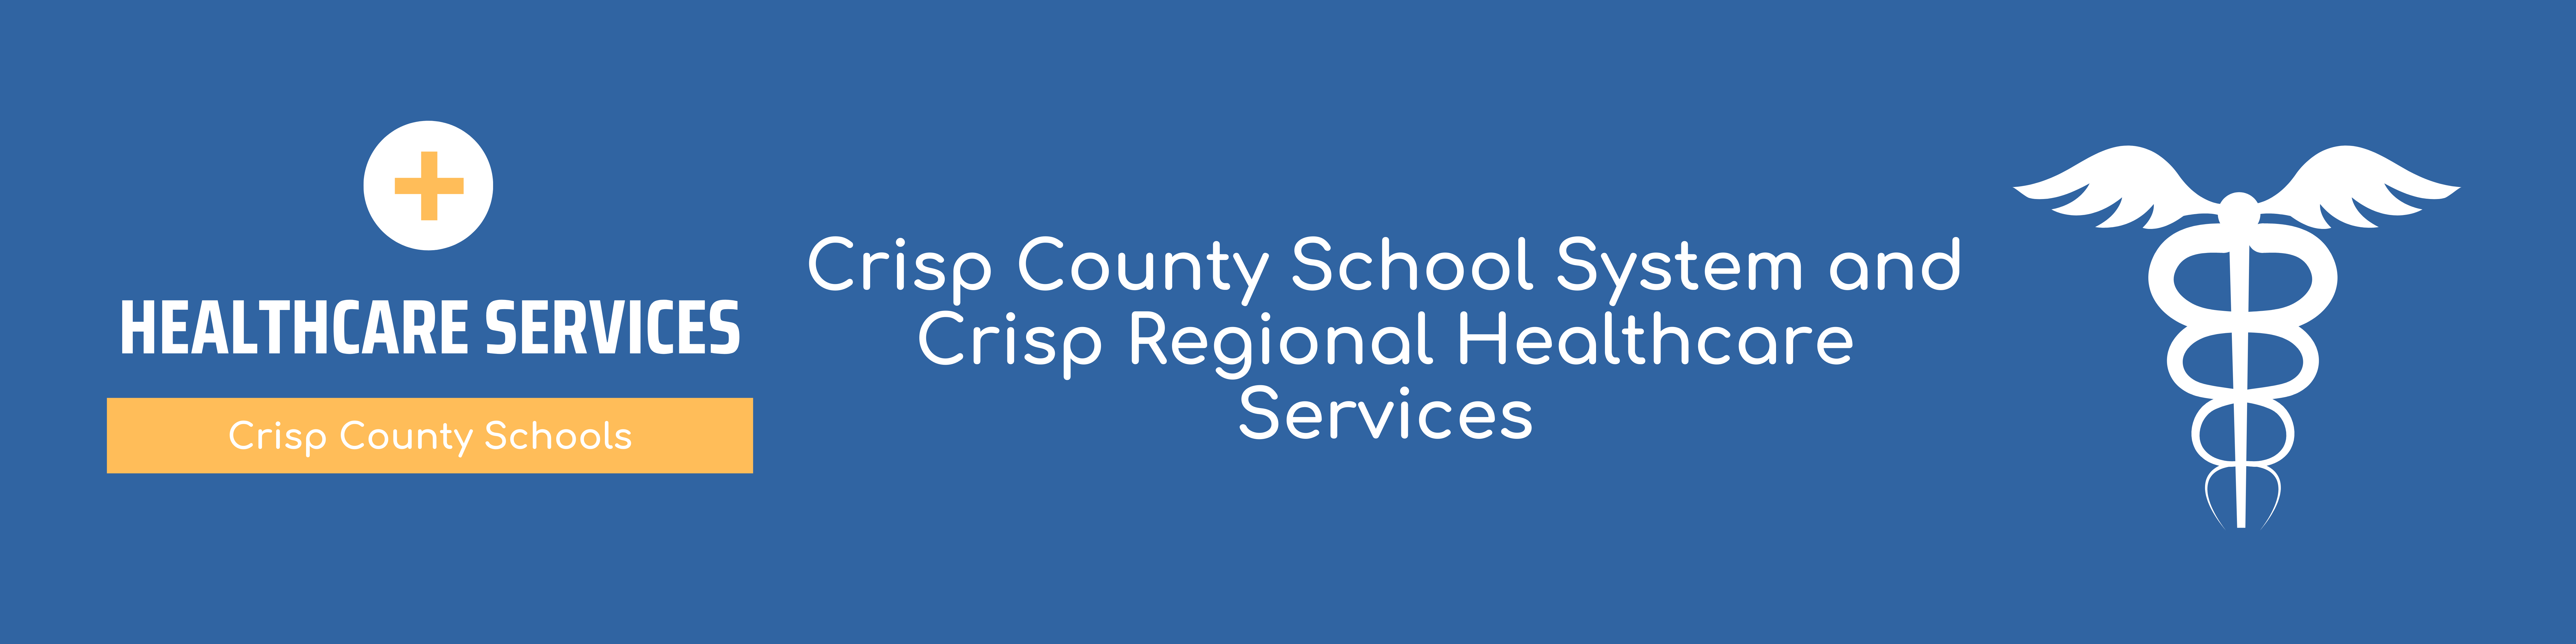 graphic of medical symbol with text "crisp county schools and crisp regional health care"